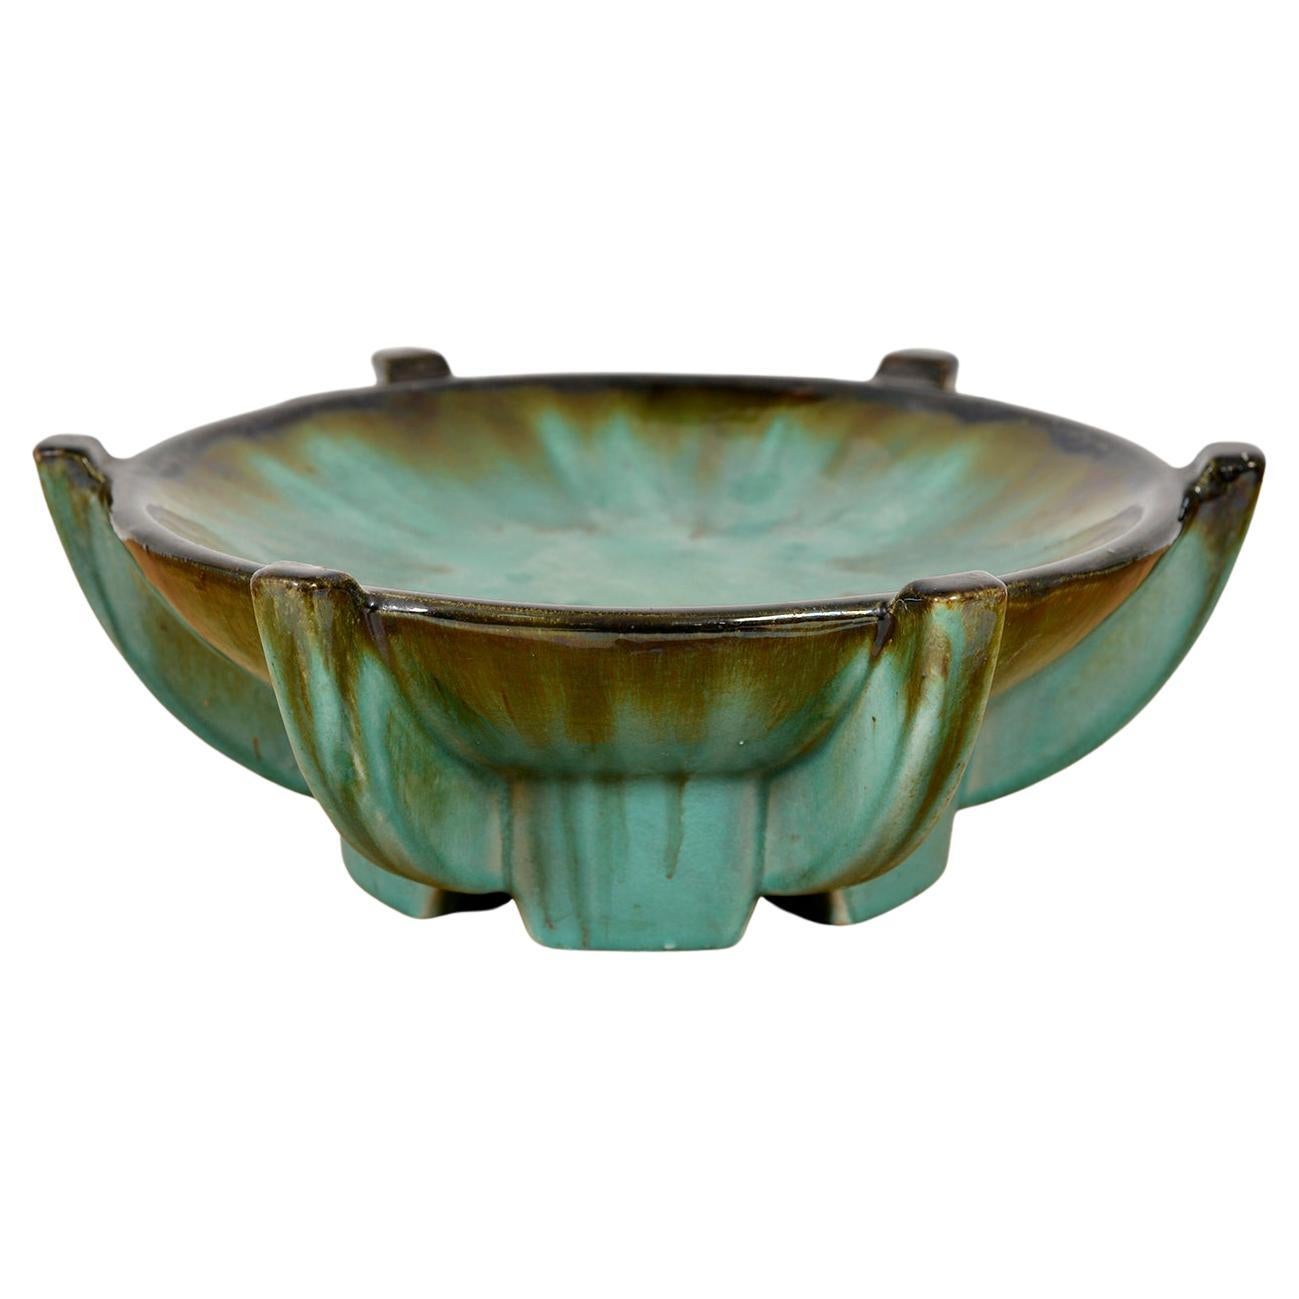 1930s Art Deco Modernist Faience Tazza by Thulin Pottery Belgium Centrepiece For Sale